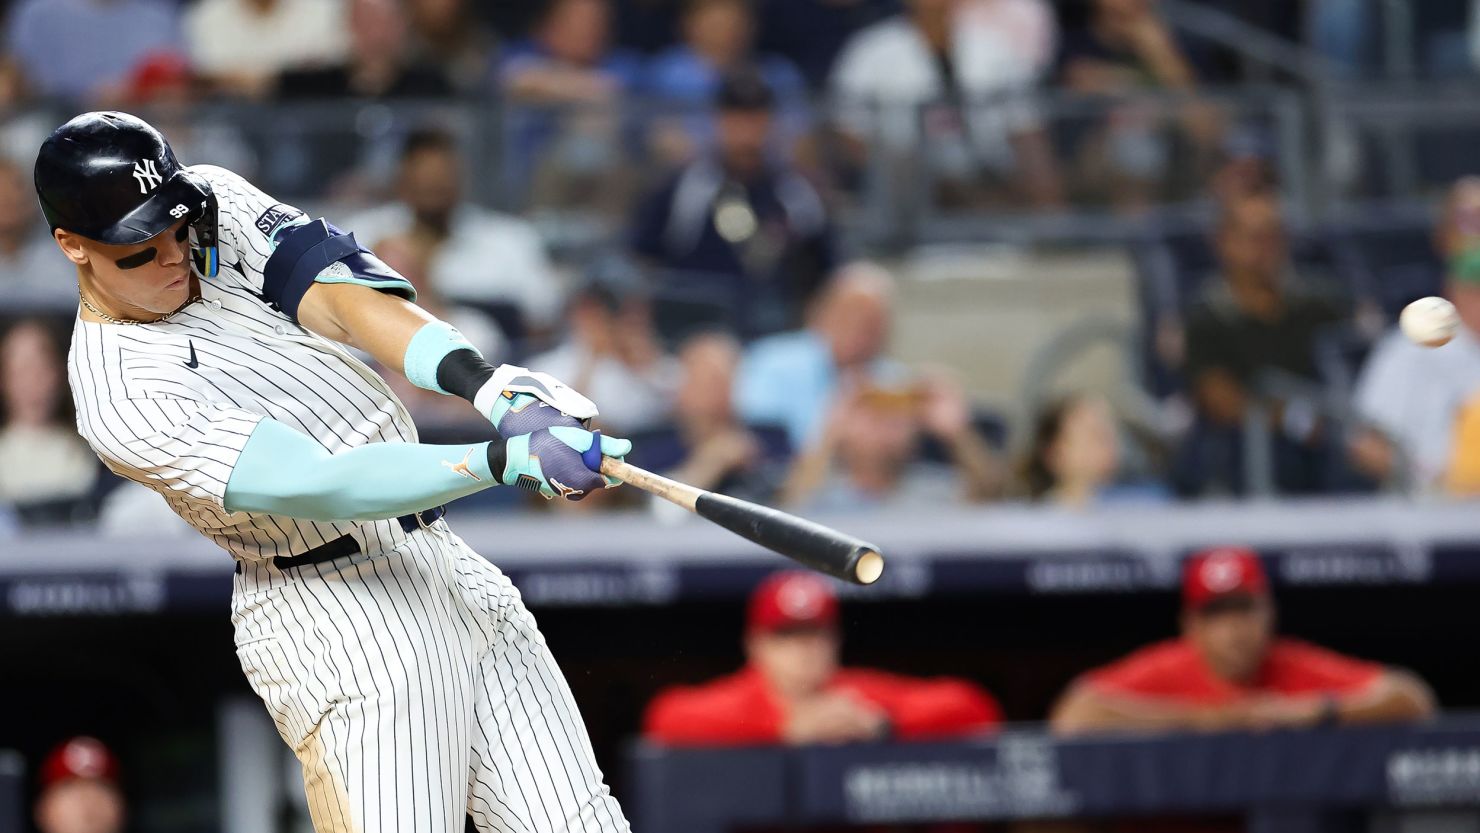 Judge hit his 32nd home run of the season in the loss.